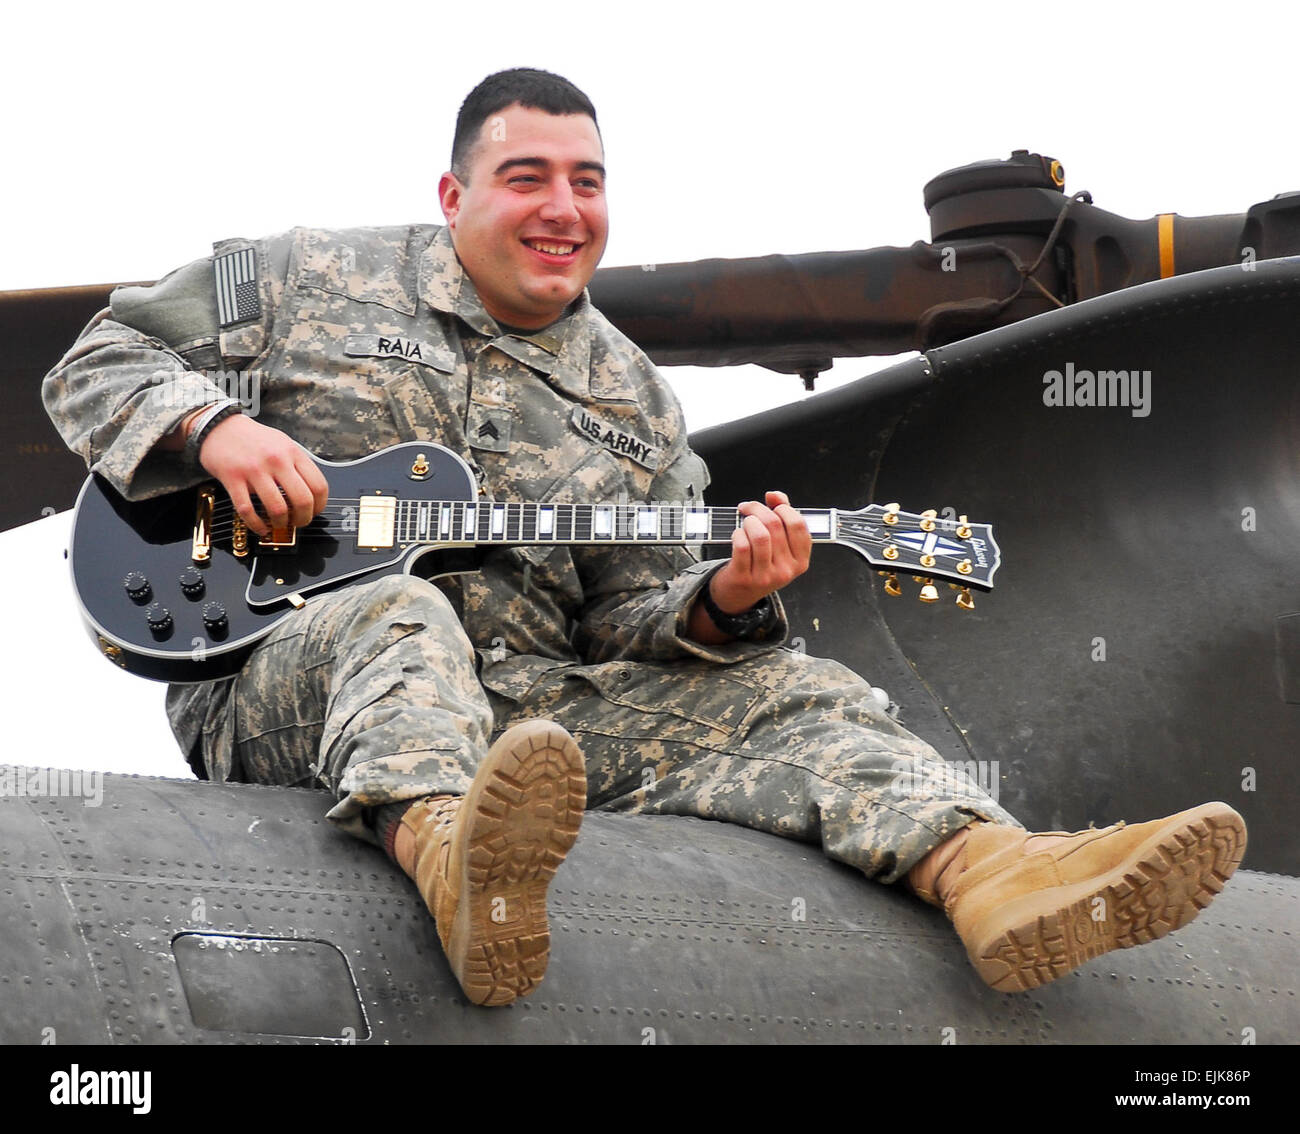 Sgt. Nicholas Raia of Altoona, Pa., strums his guitar on top of a CH-47 Chinook helicopter at Contingency Operating Base Adder, Iraq. Raia, who performs in the Pennsylvania National Guard's 28th Infantry Division Band, volunteered to deploy as a door gunner with the 28th Combat Aviation Brigade.         Guard Soldier trades guitar for gun  /-news/2009/10/30/29622-guard-soldier-trades-guitar-for-gun/ Stock Photo